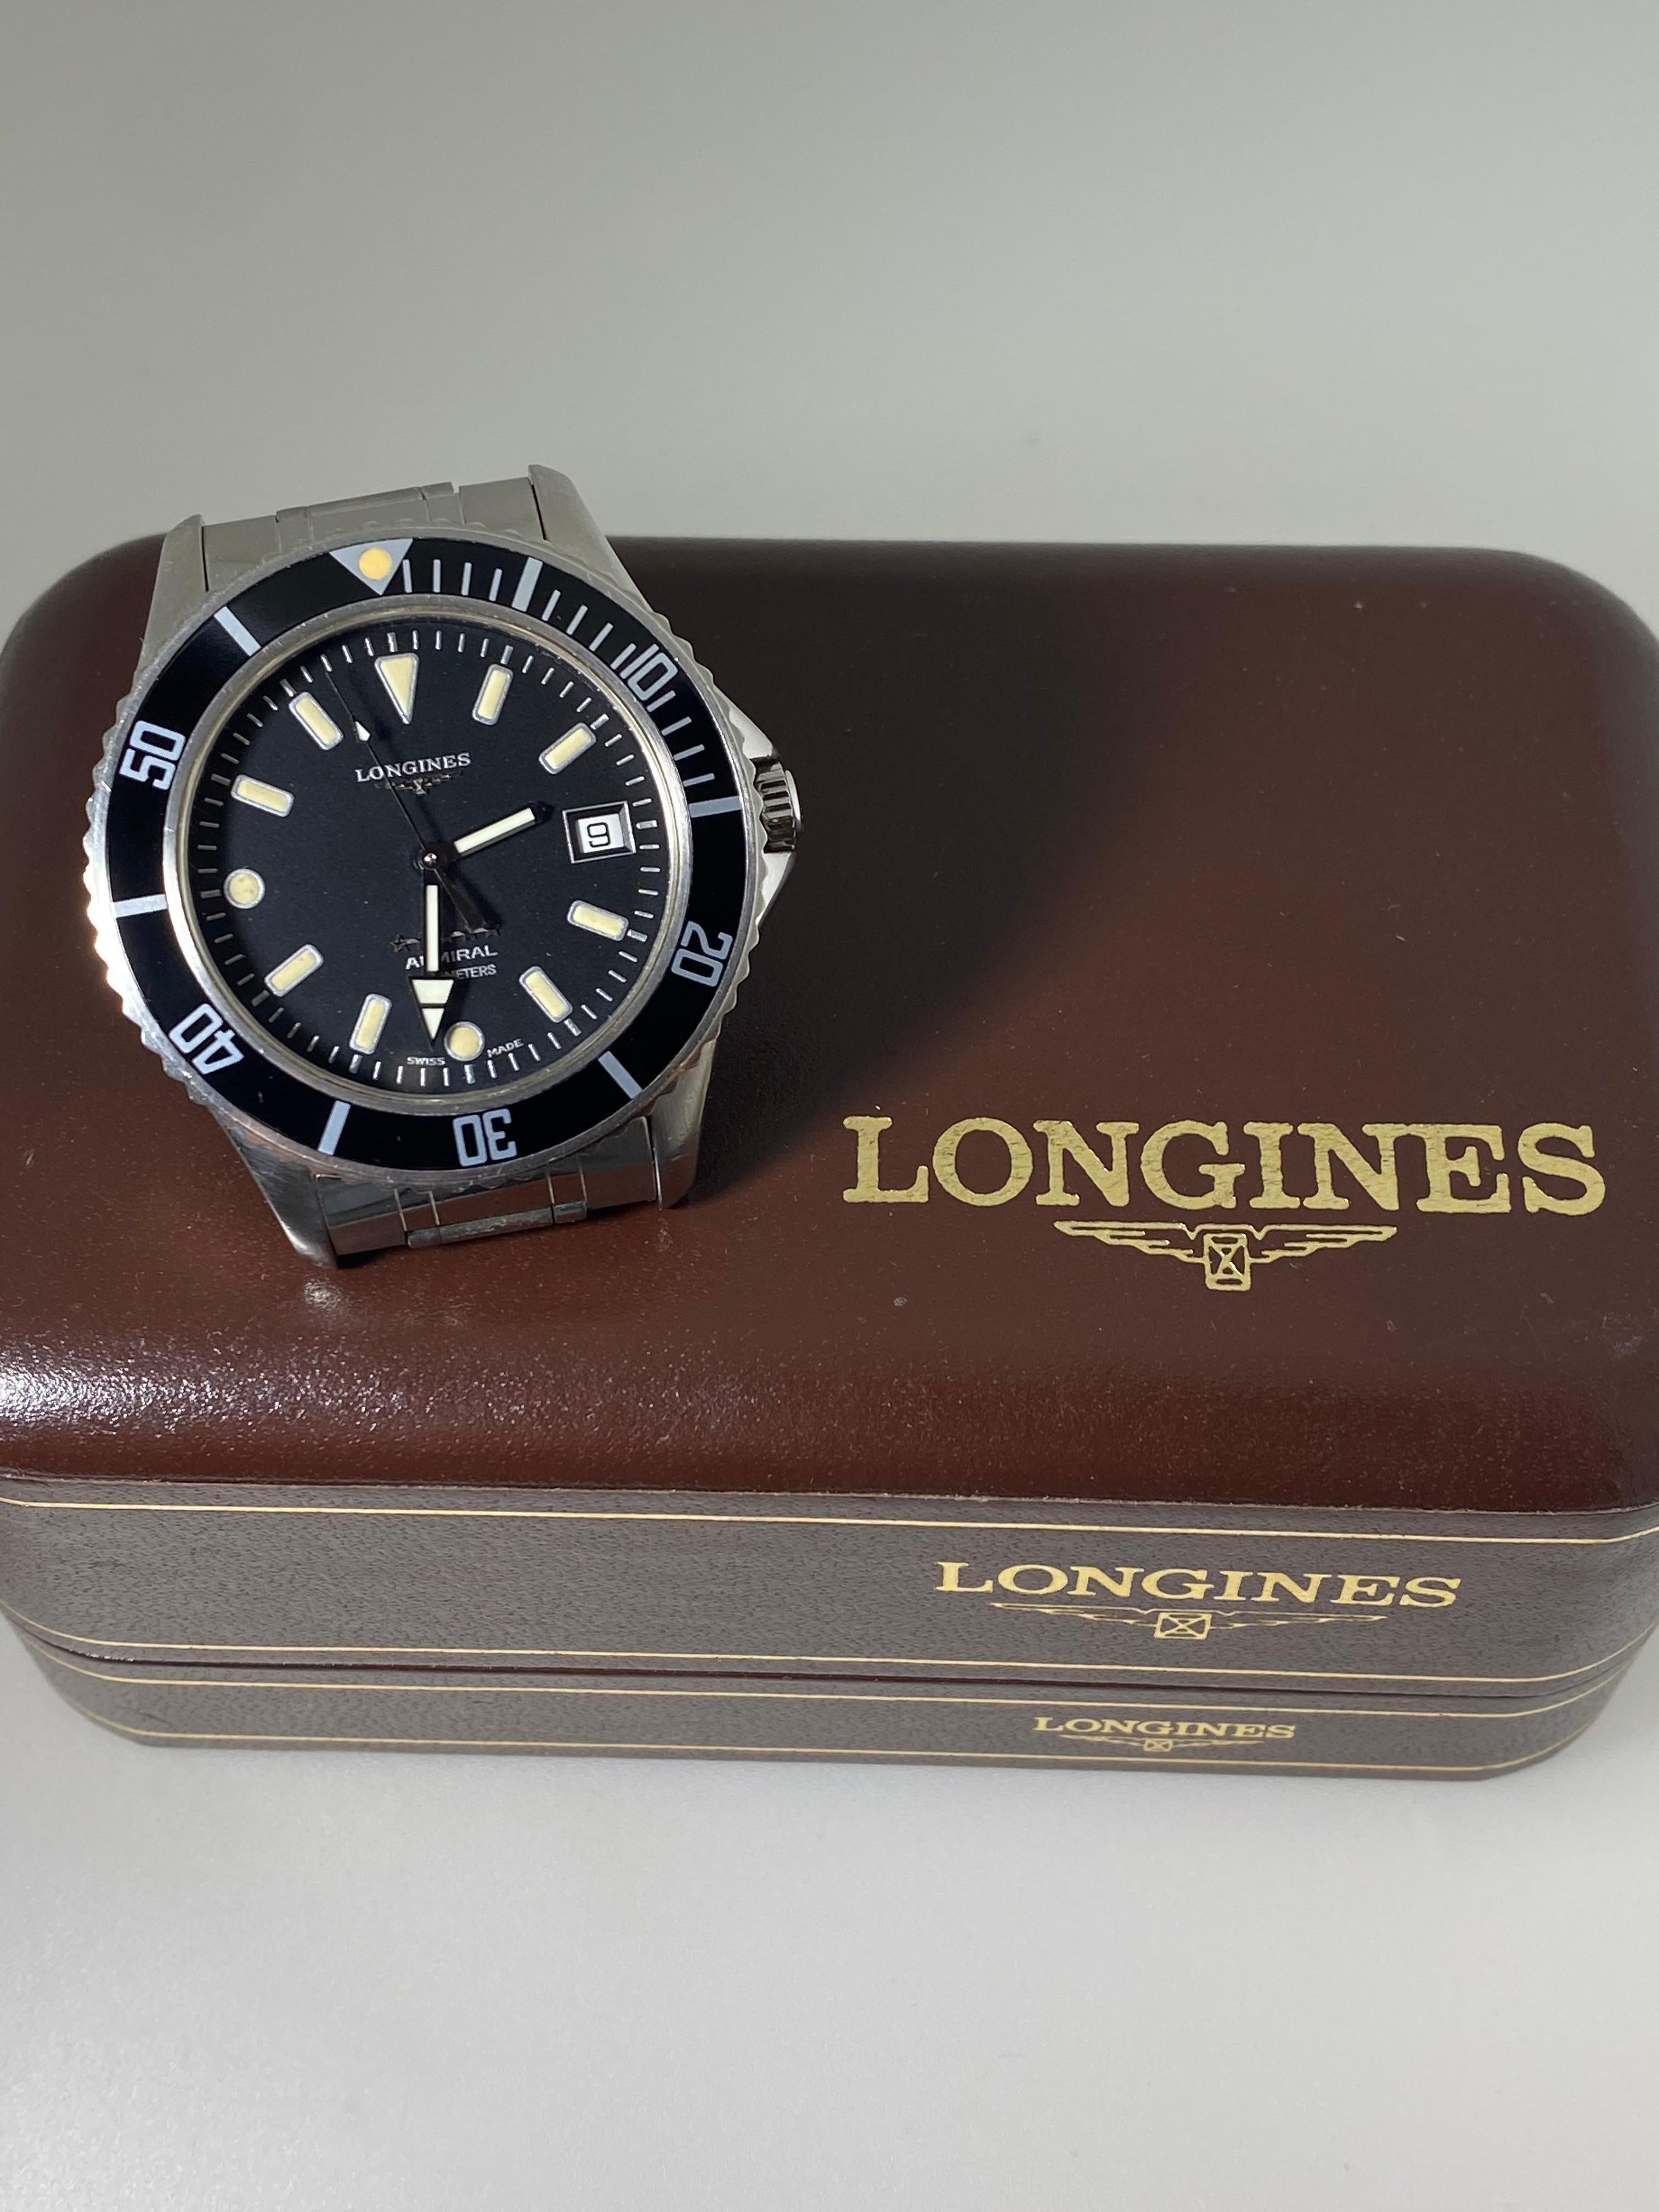 Longines ref. 7463 5-Star Admiral 200m Automatic Divers Watch. Box + Link. 90's. For Sale 2